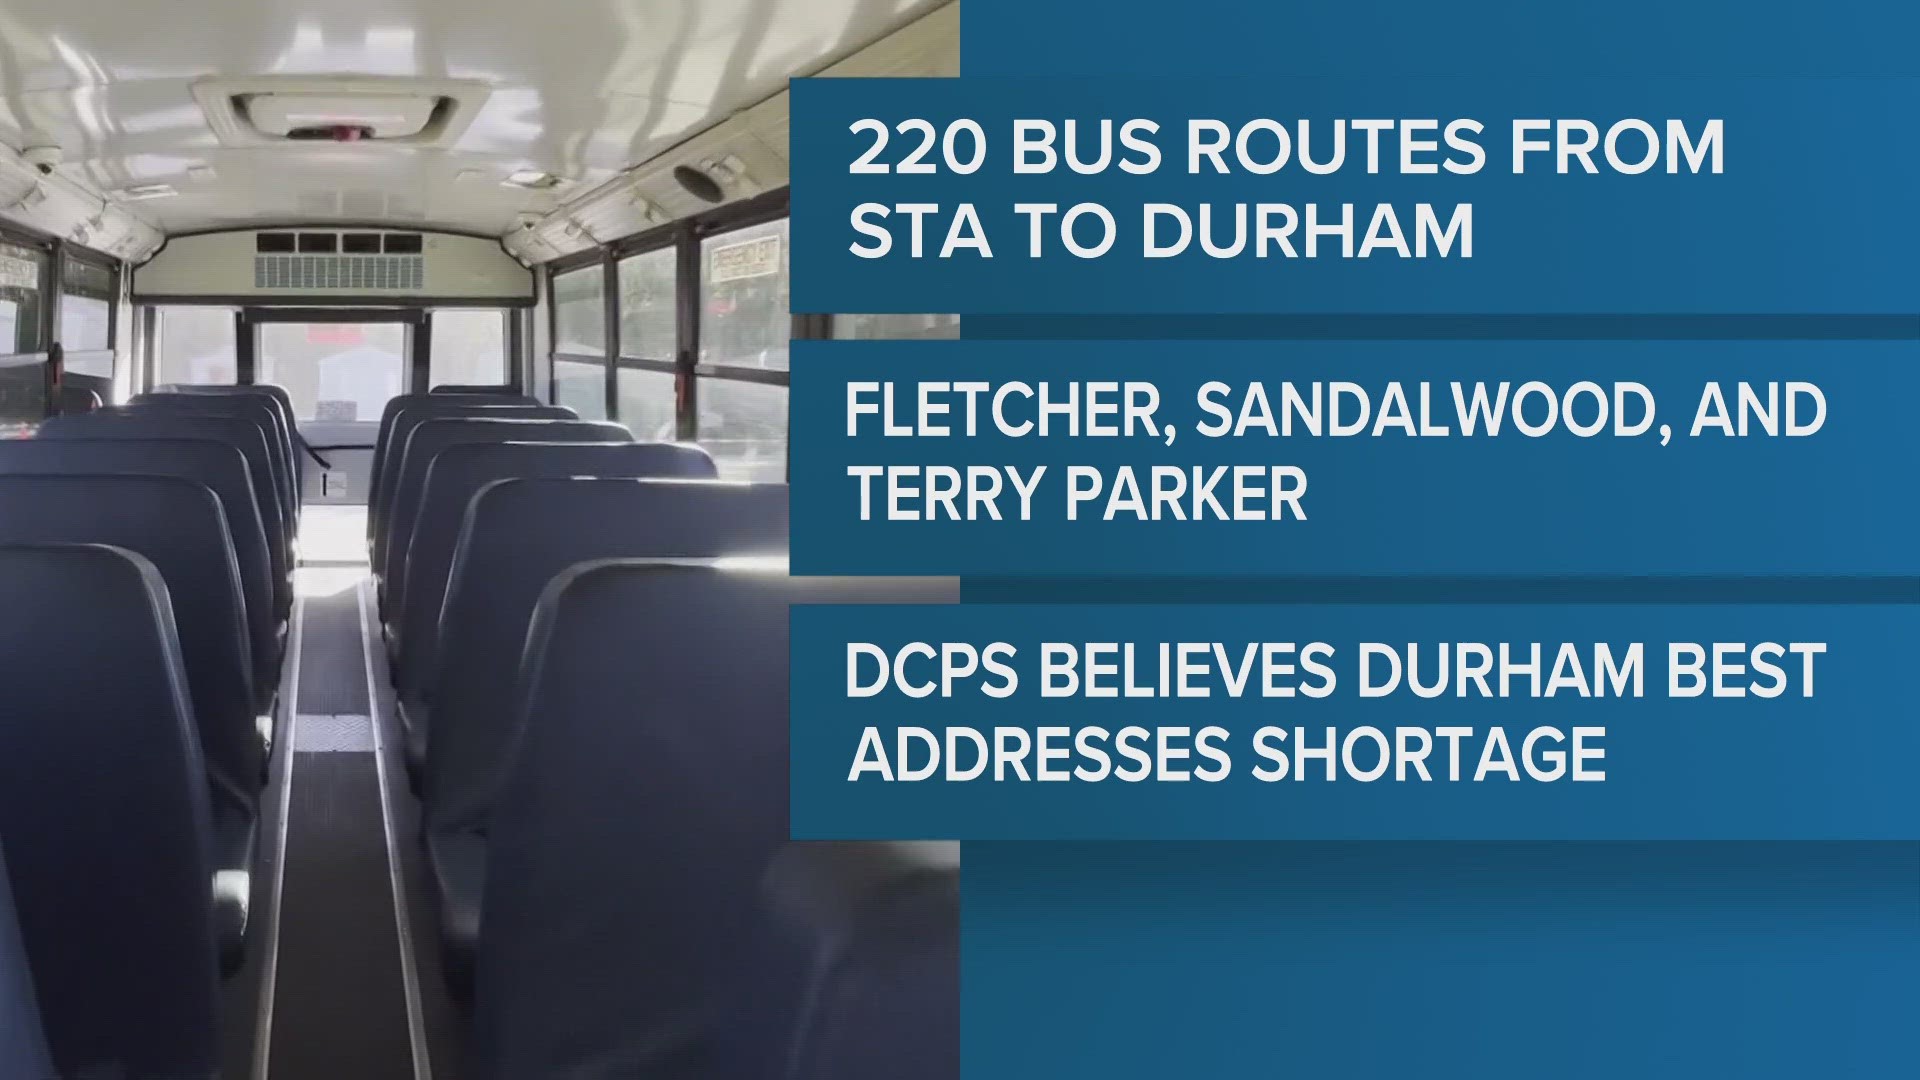 The contract will start next year and will impact bus routes in the Fletcher, Sandalwood, and Terry Parker High School areas.